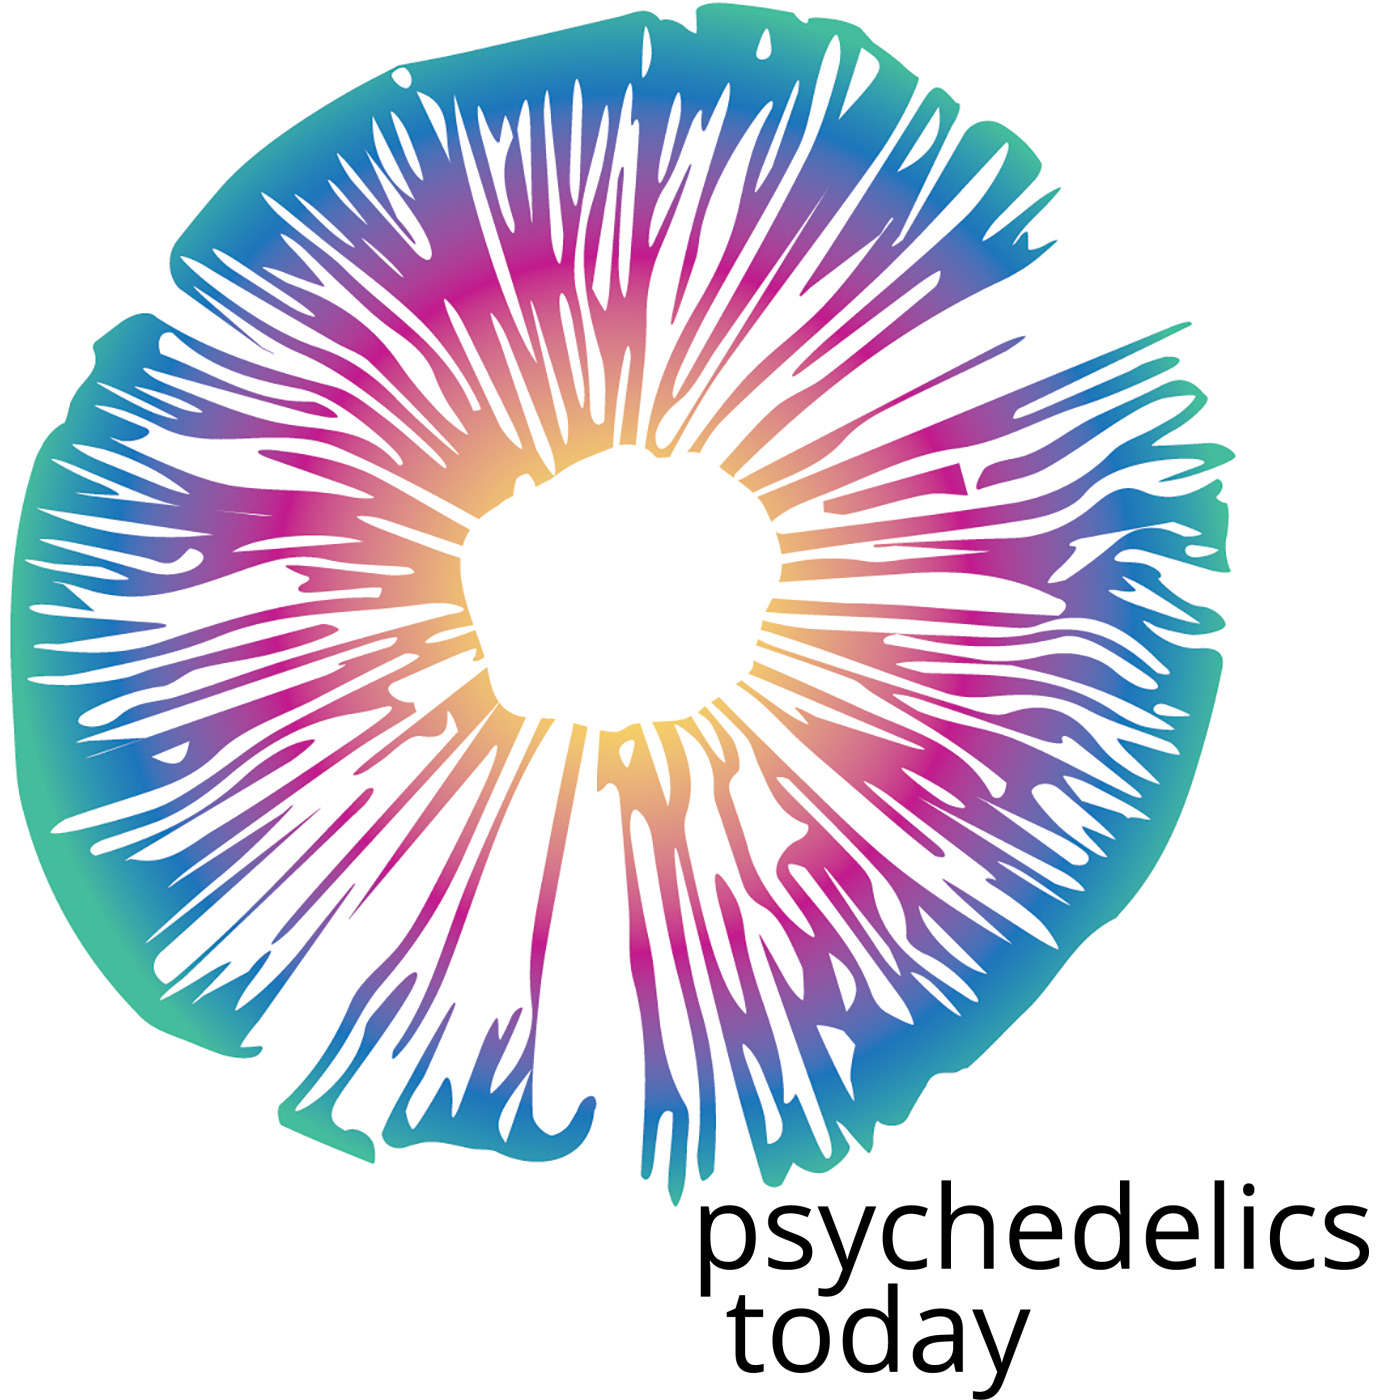 By Facilitating Creativity, Psychedelics Aid Problem-Solving